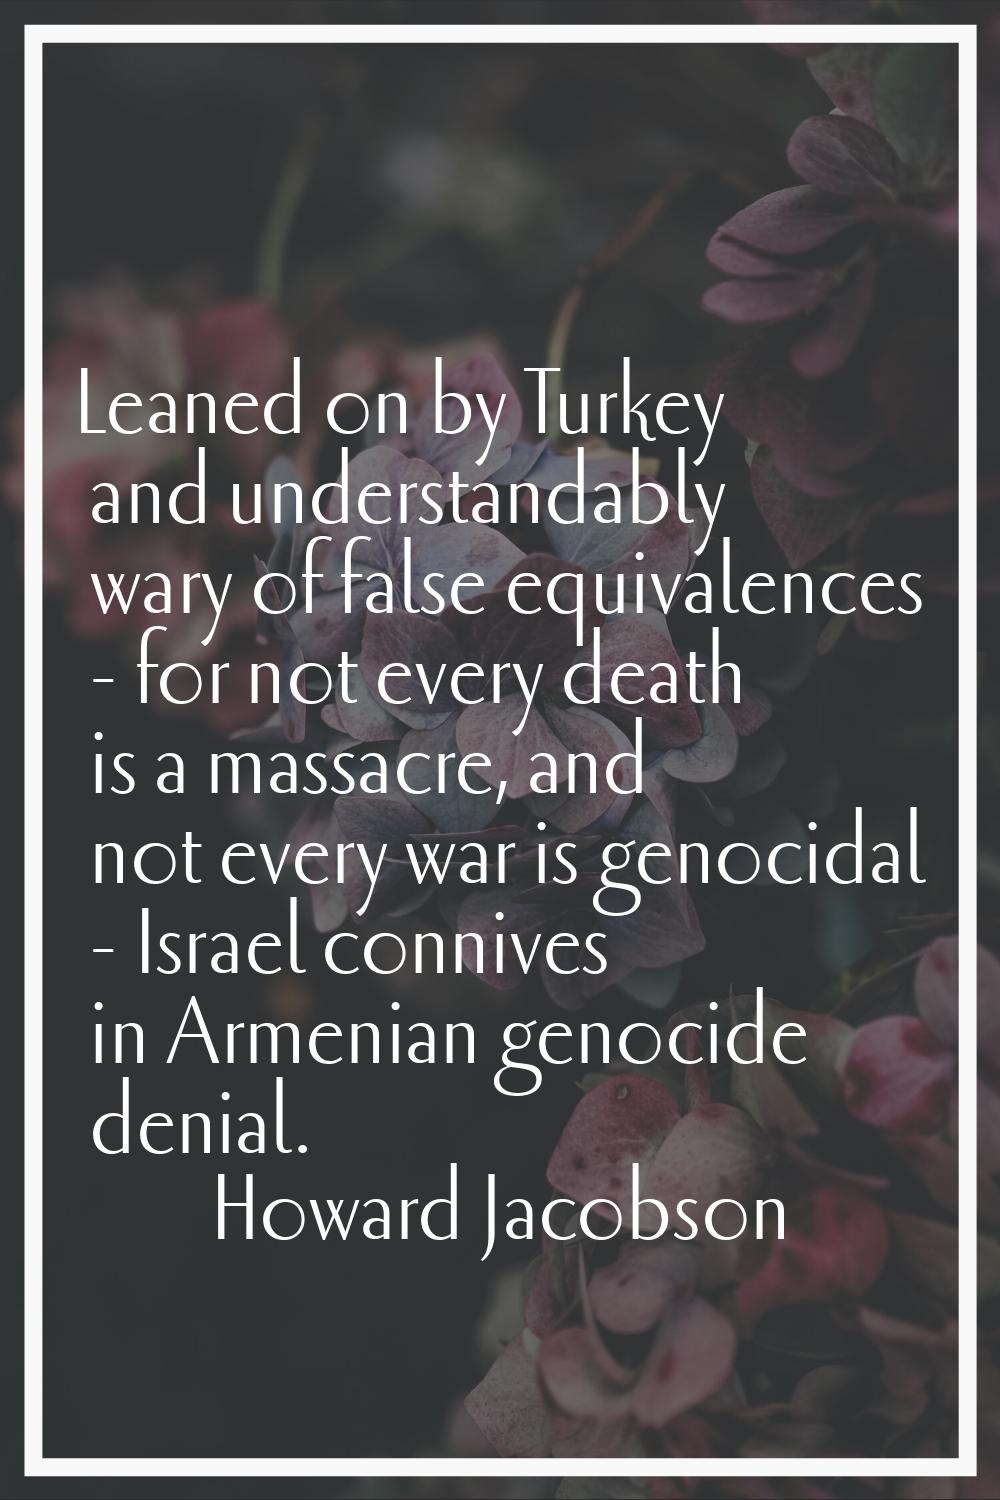 Leaned on by Turkey and understandably wary of false equivalences - for not every death is a massac